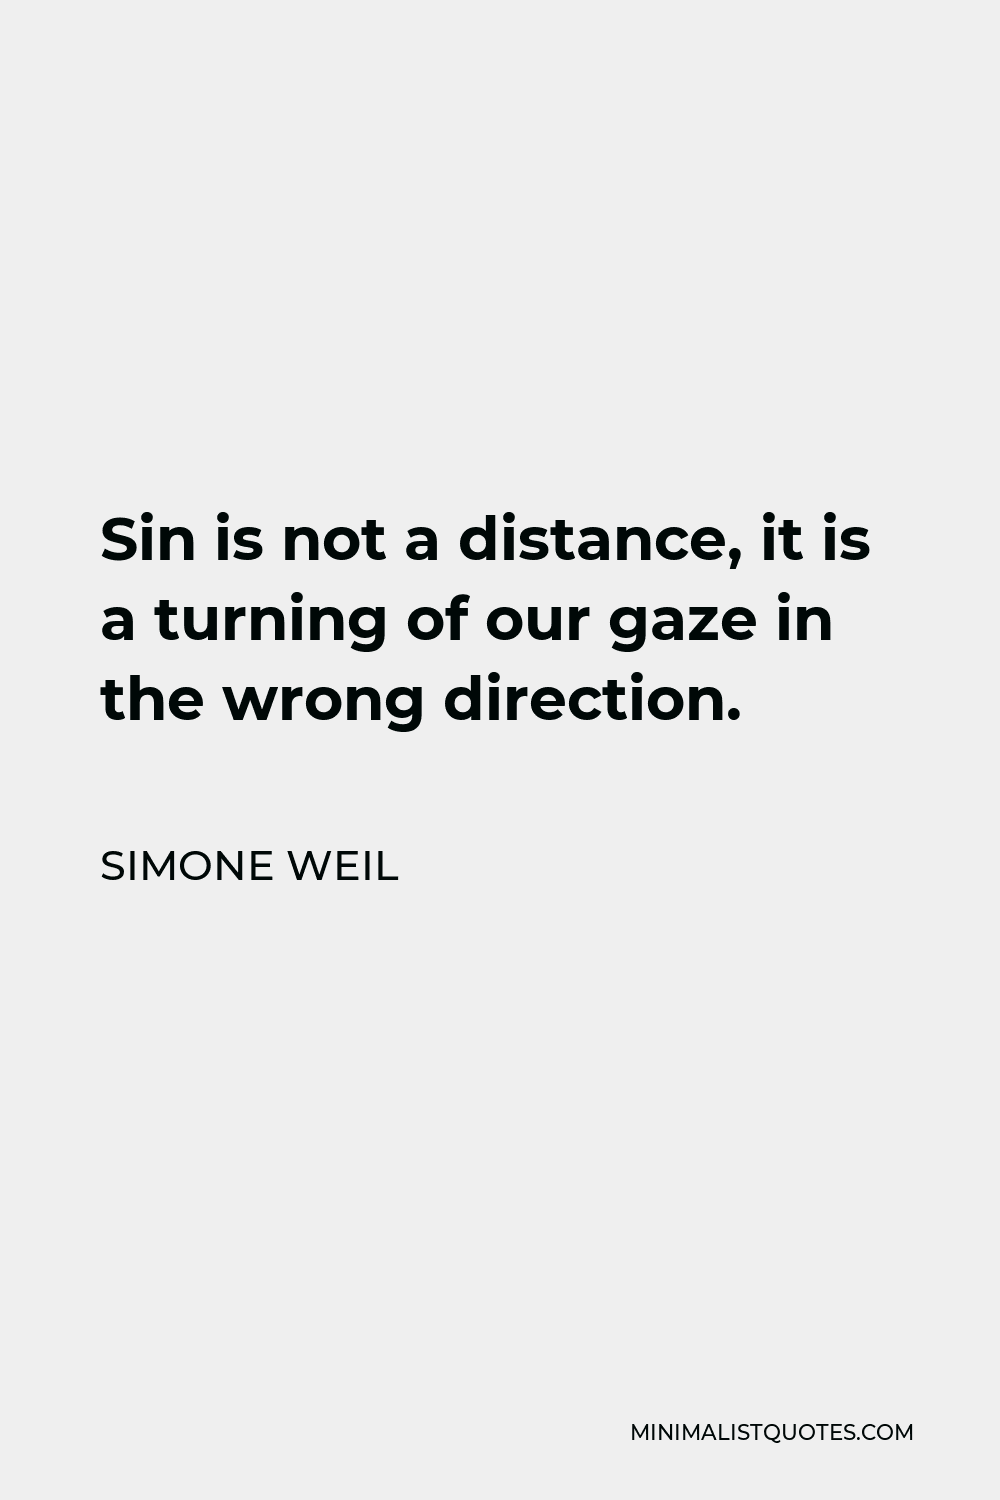 Simone Weil Quote - Sin is not a distance, it is a turning of our gaze in the wrong direction.